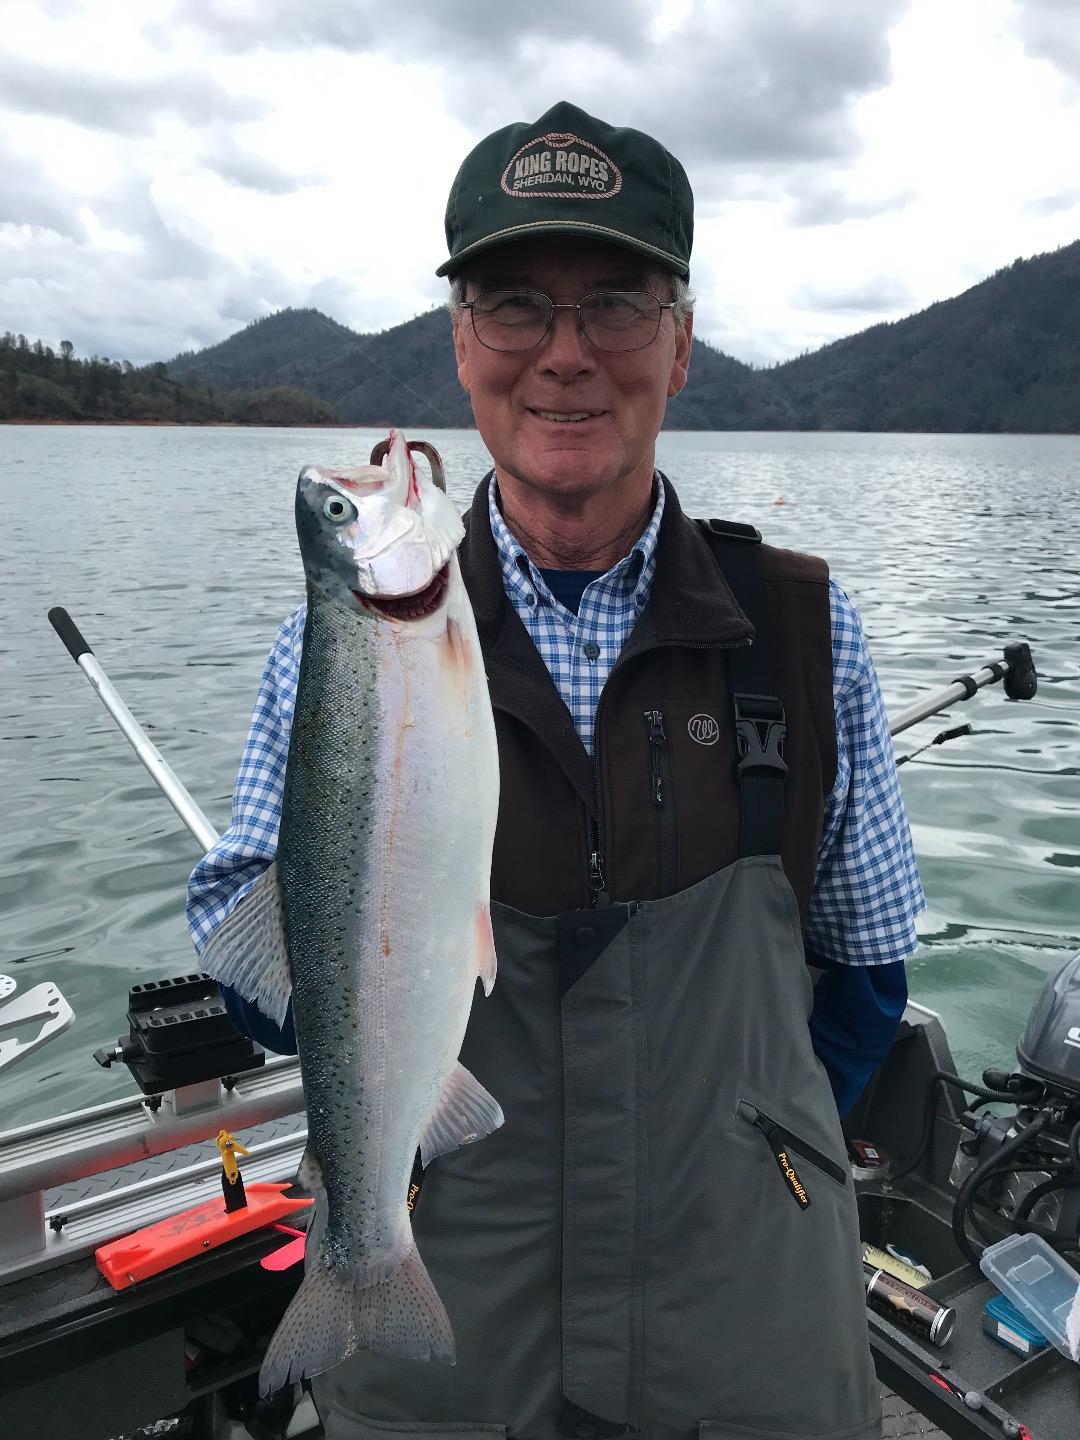 Shasta Lake releases more water!